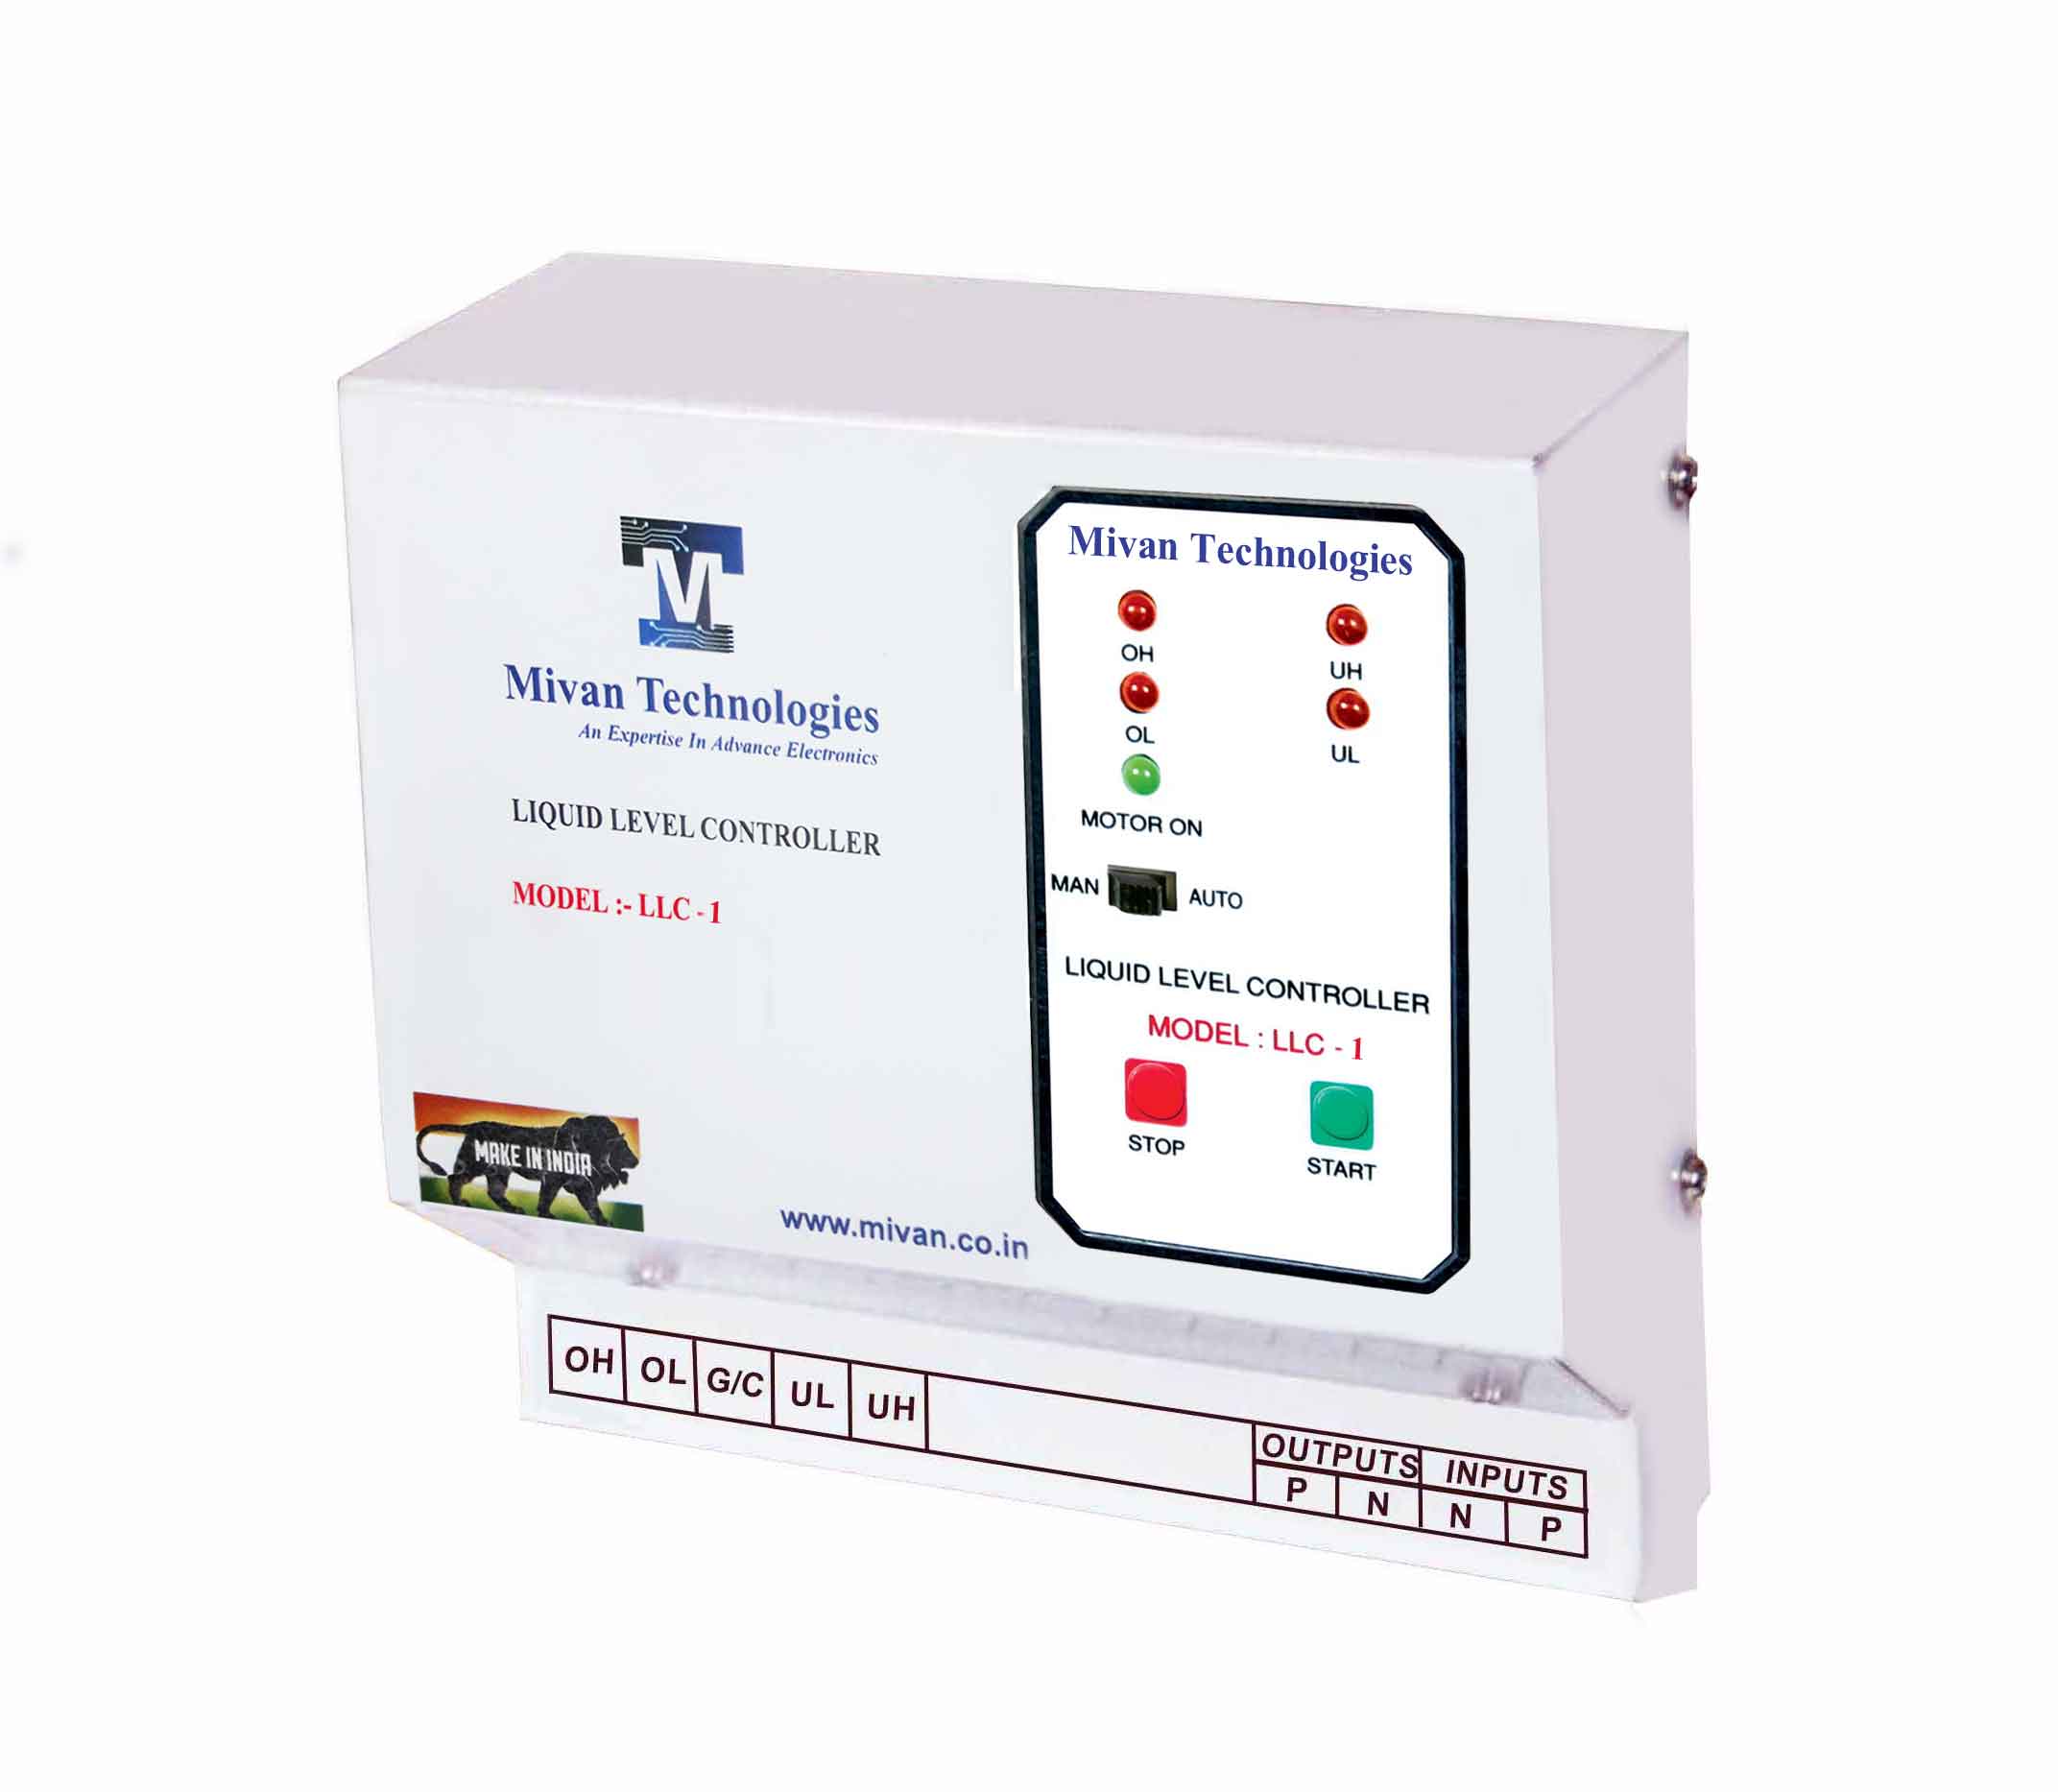 LLC 1 MS Fully Automatic Water Level Controller and Indicators For Up and Down Tank With 6 Sensors Suitable For Motor Up to 5Hp Supply 230 VAC